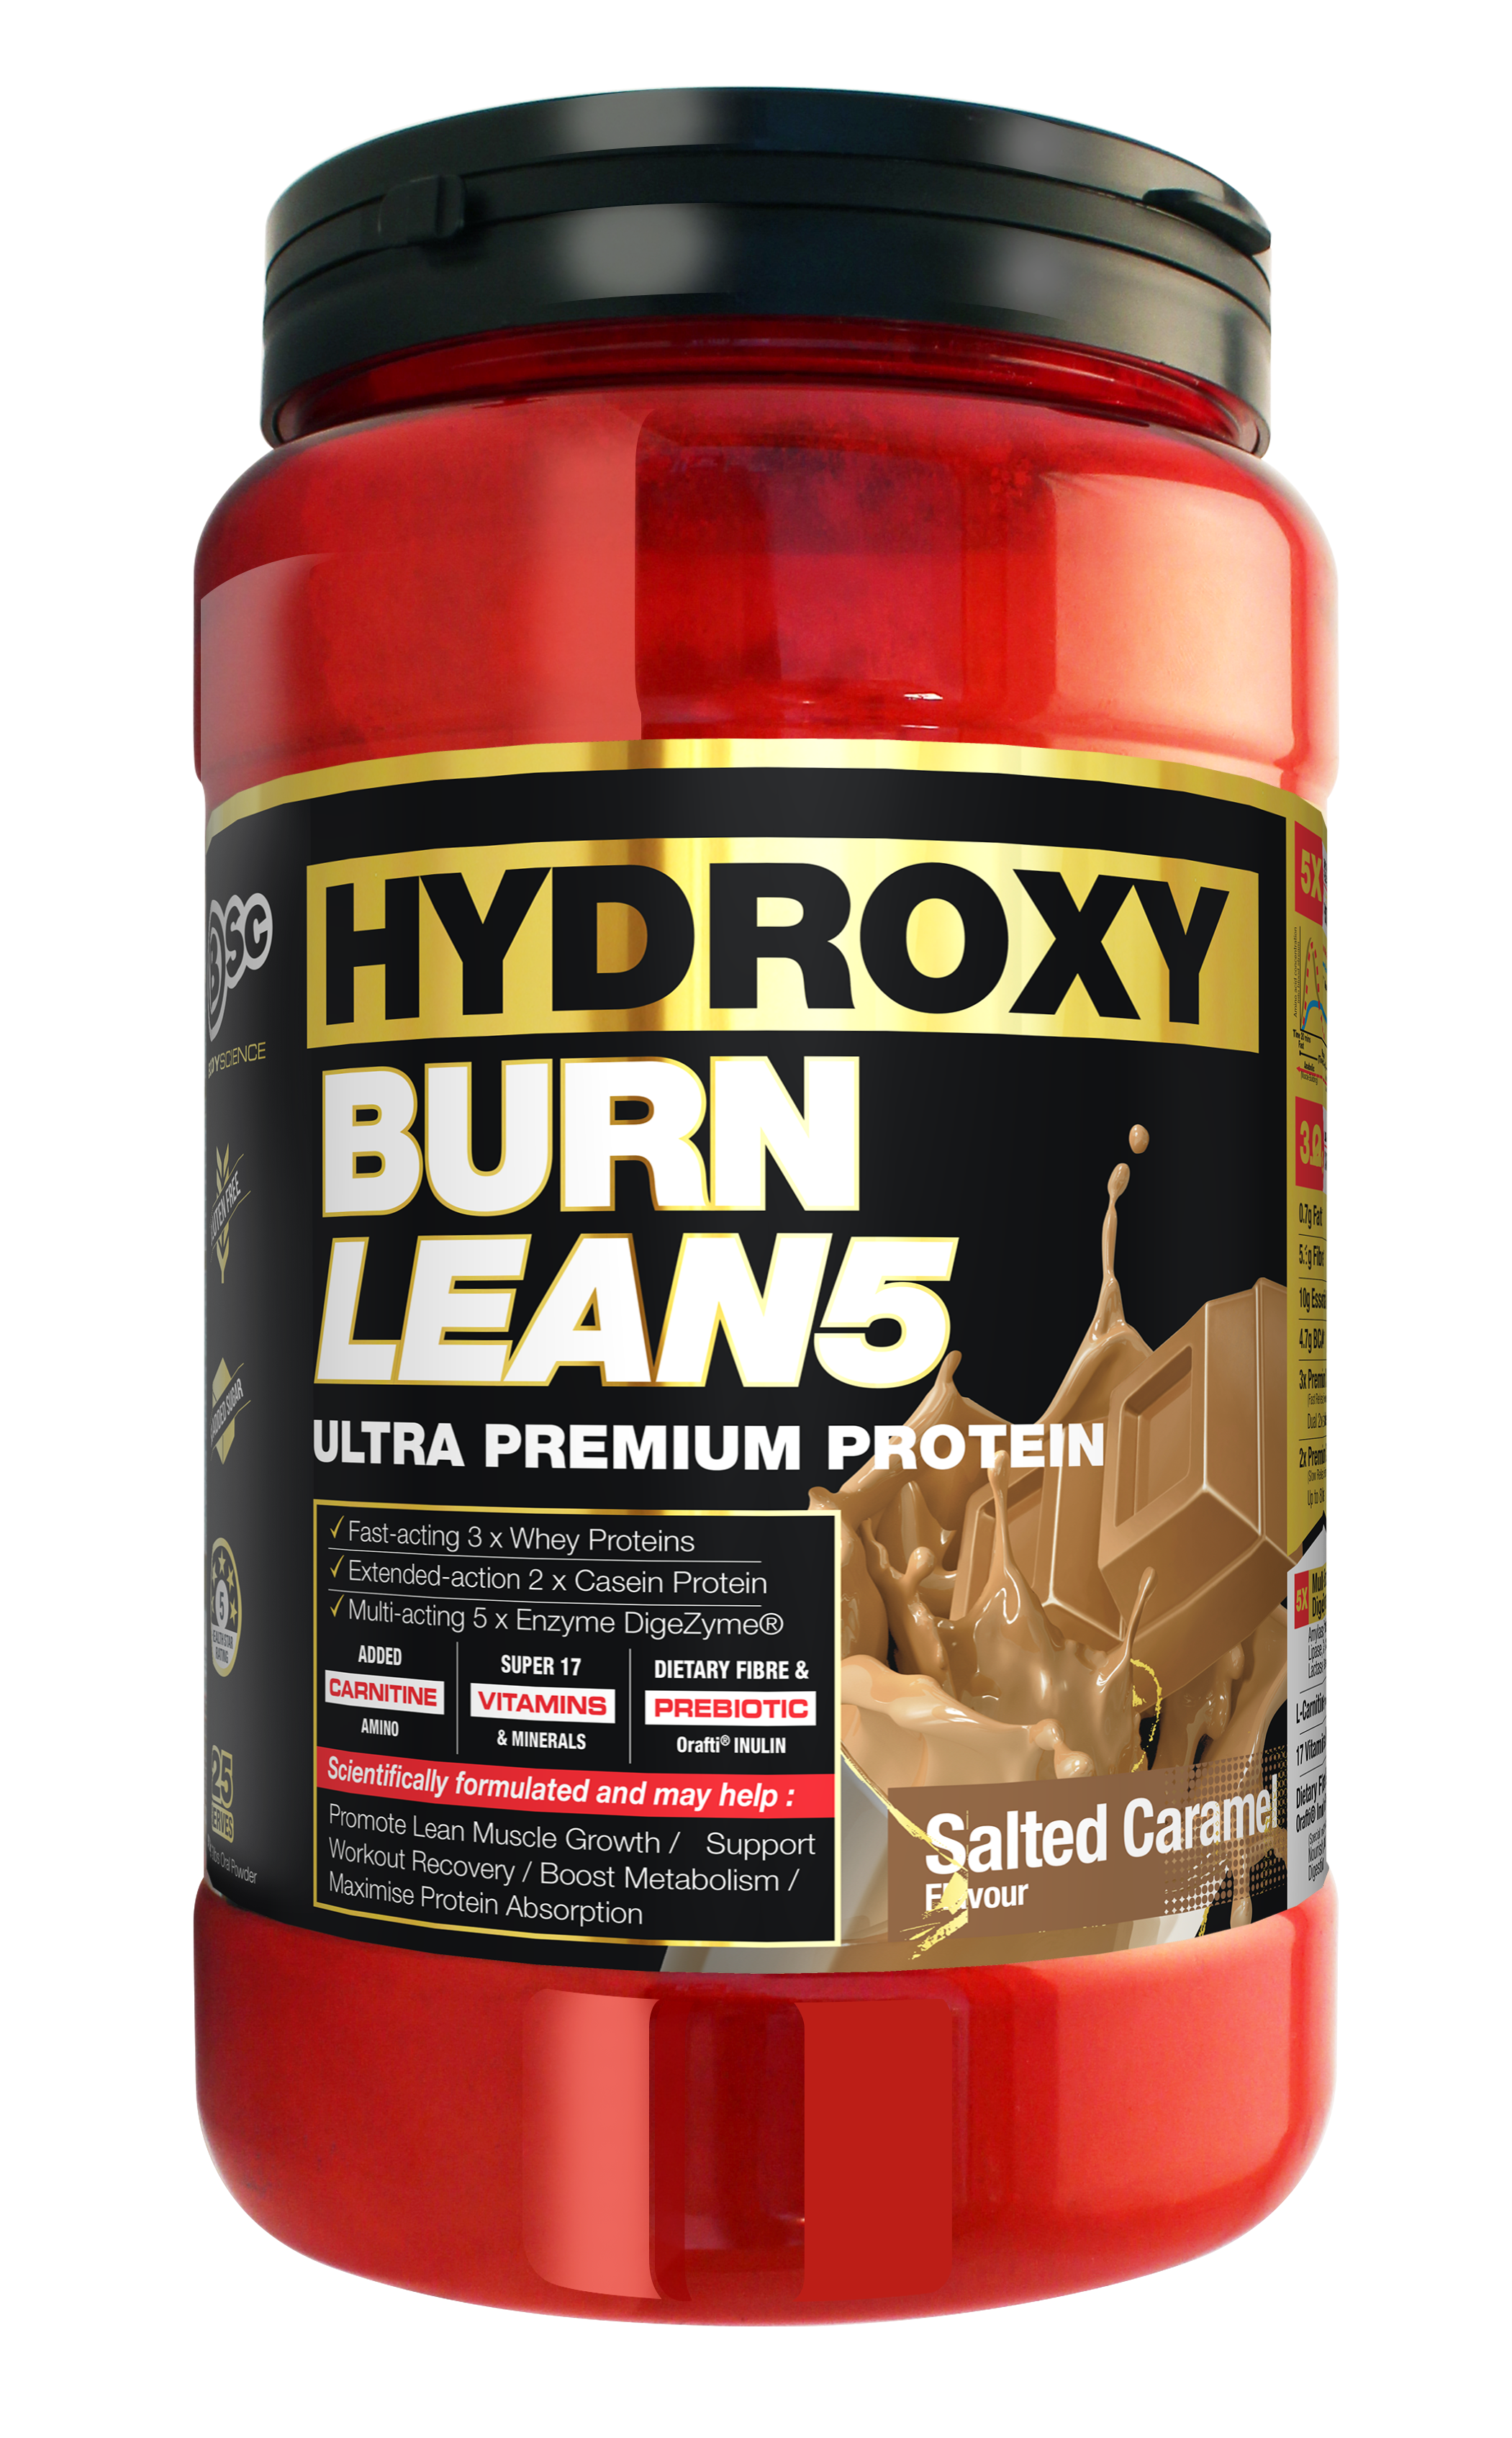 BSc HydroxyBurn Lean5 Low Carb Protein - Super Nutrition